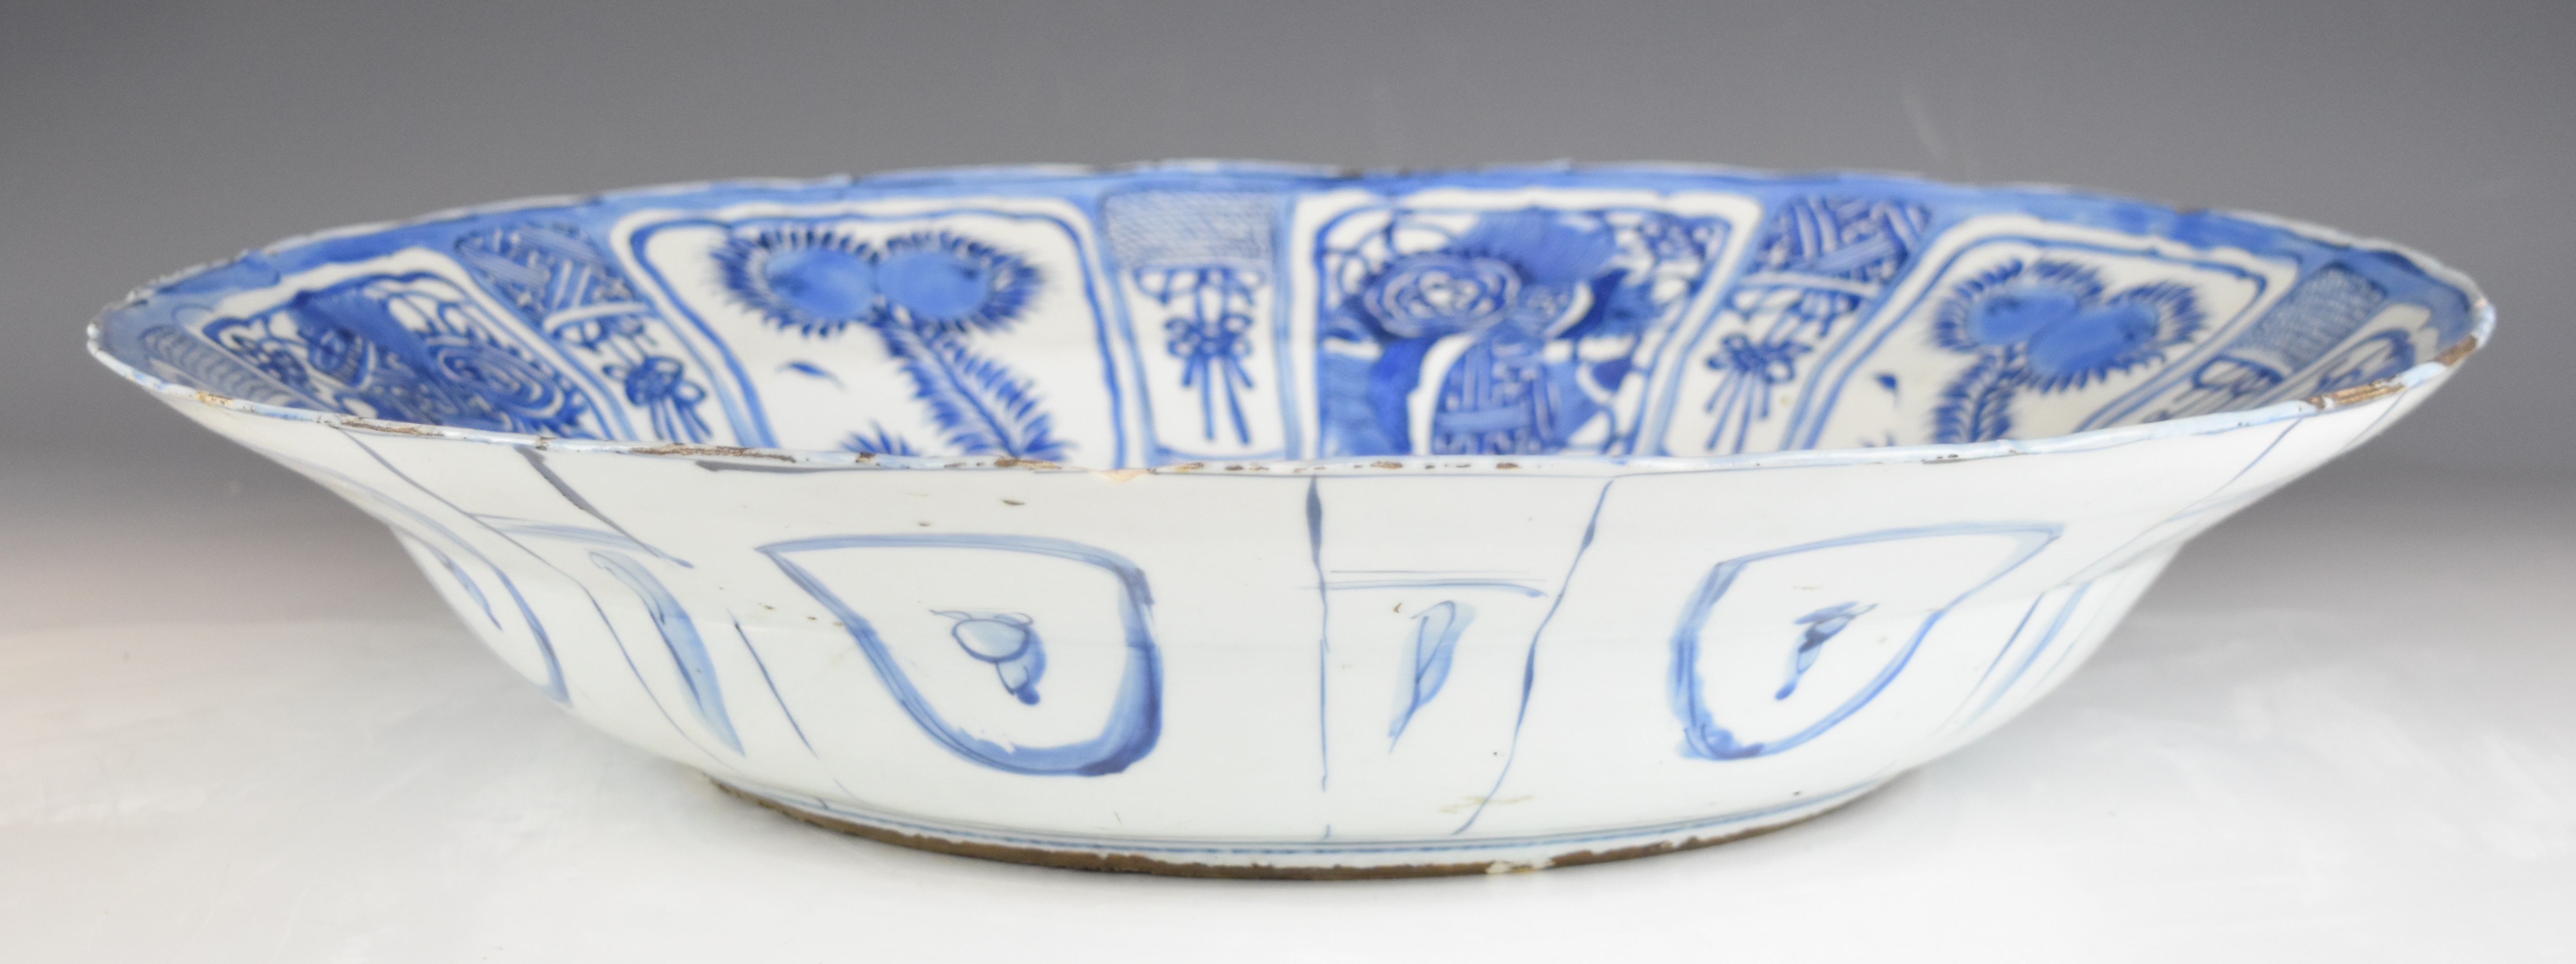 Chinese Kraak porcelain large charger or bowl with central decoration of flora and fauna, diameter - Image 2 of 10